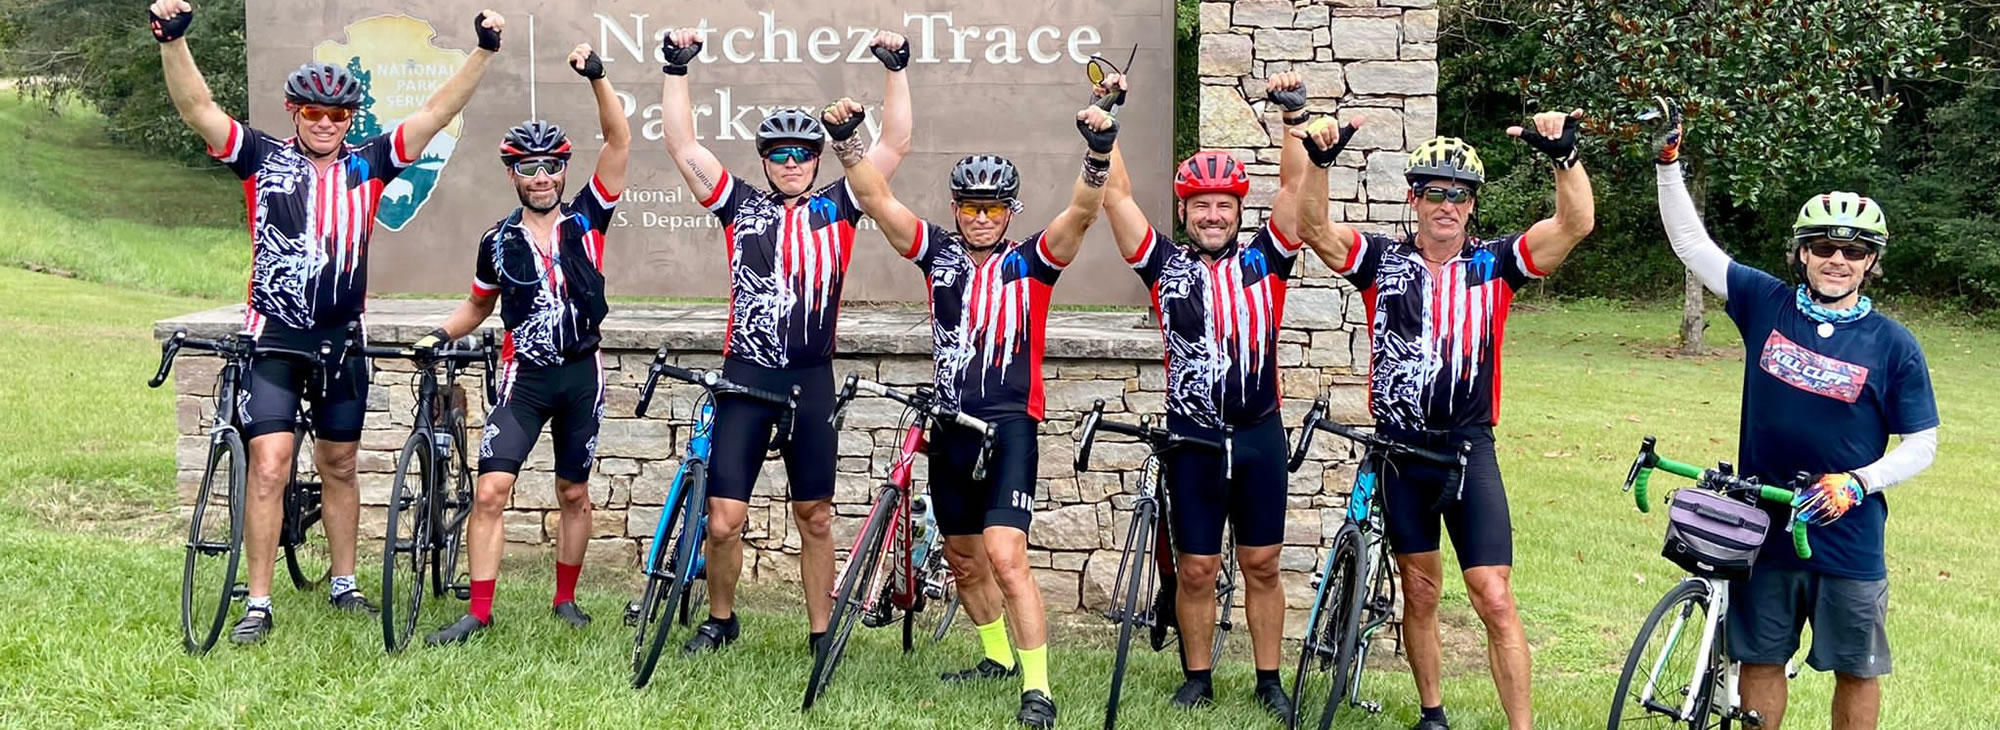 Navy SEAL supporters ride in support of the Navy SEAL Museum’s Trident House Charities Program